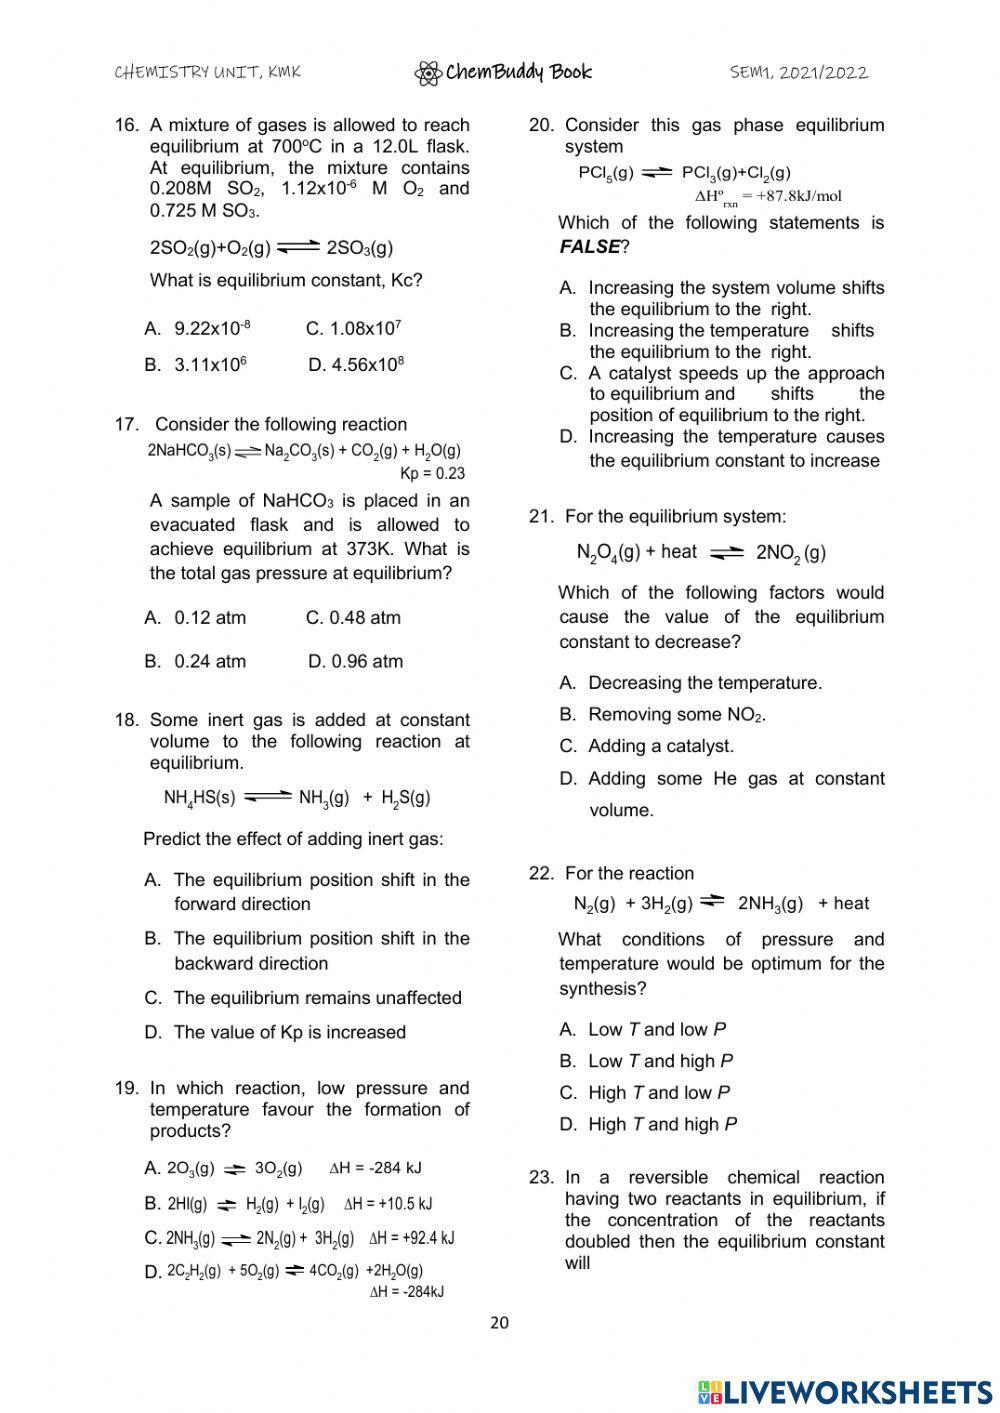 Chembuddy chemical equilibrium page 3